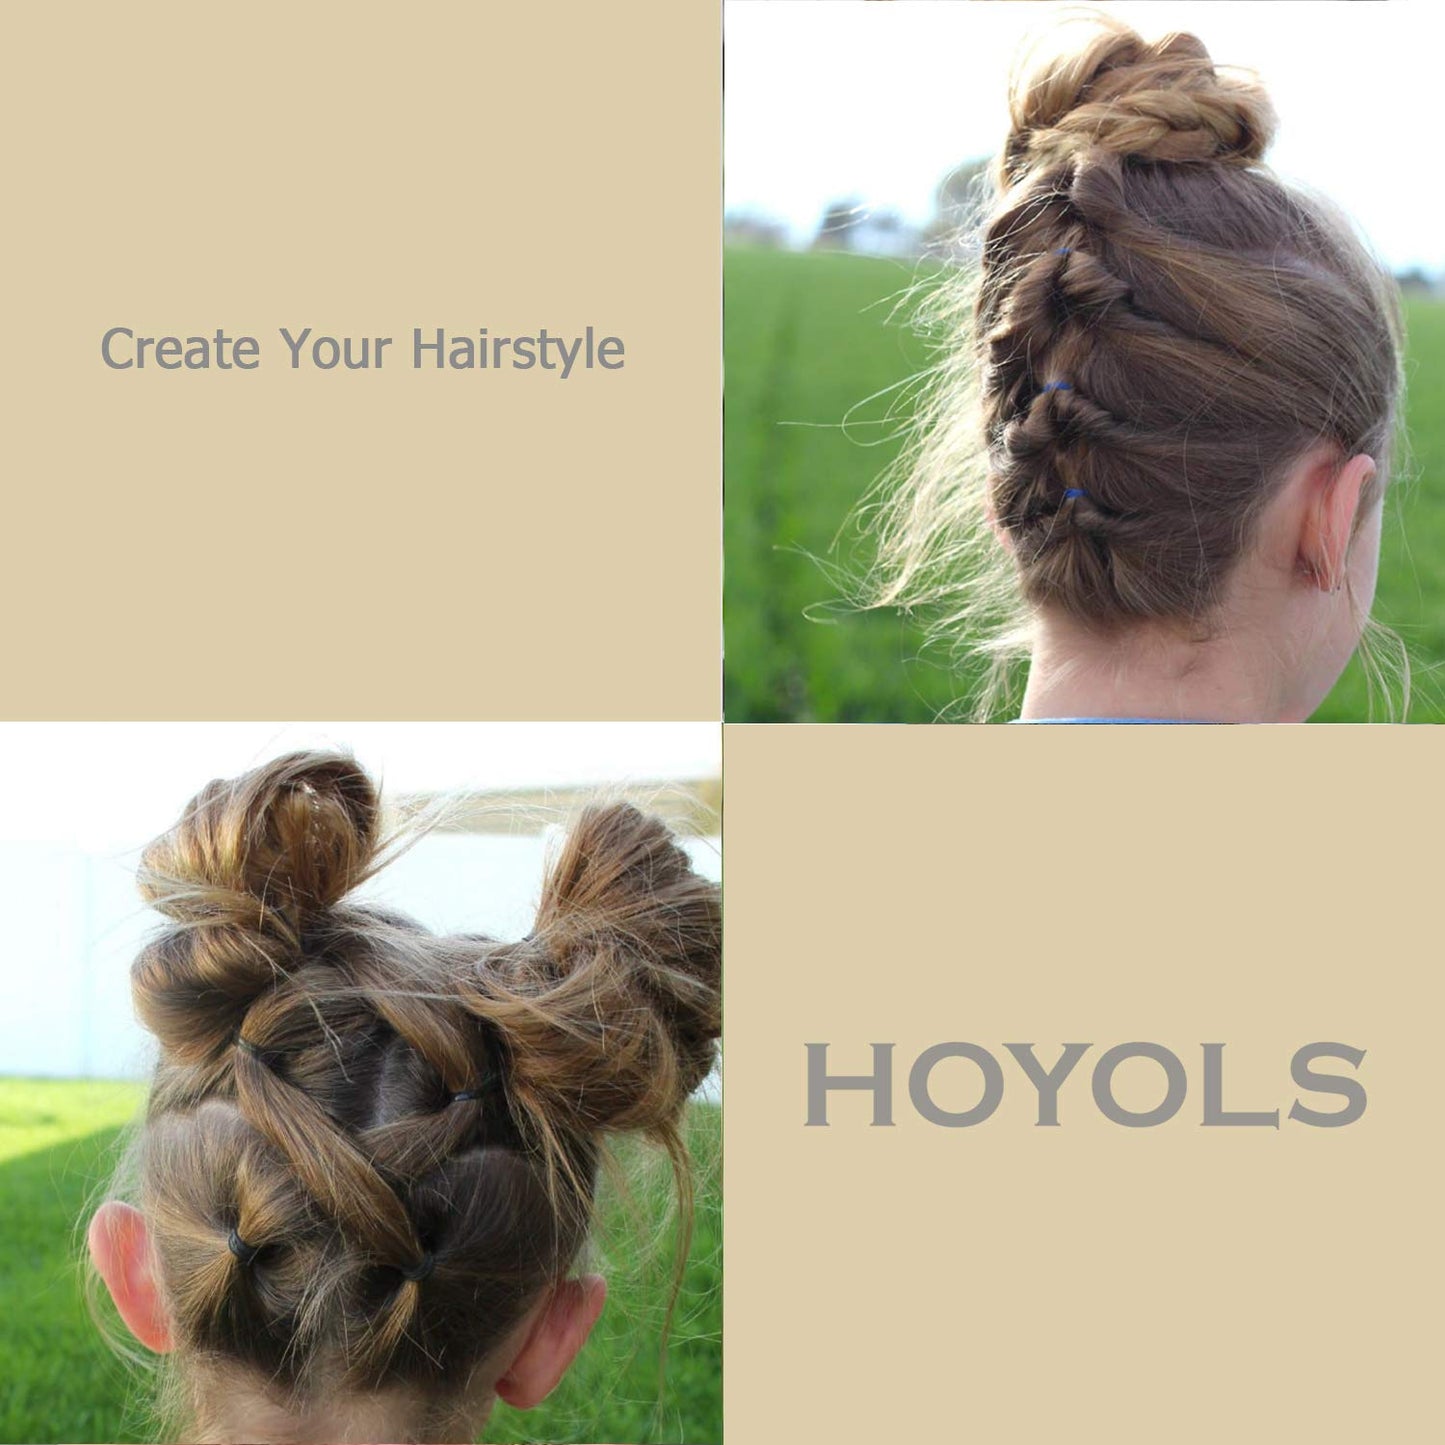 Hoyols Hair Elastic Ties Mini Soft Rubber Bands Ponytail Polyband Braid Holder for Kids Baby Girl 1000 Piece Pack (Caramel)